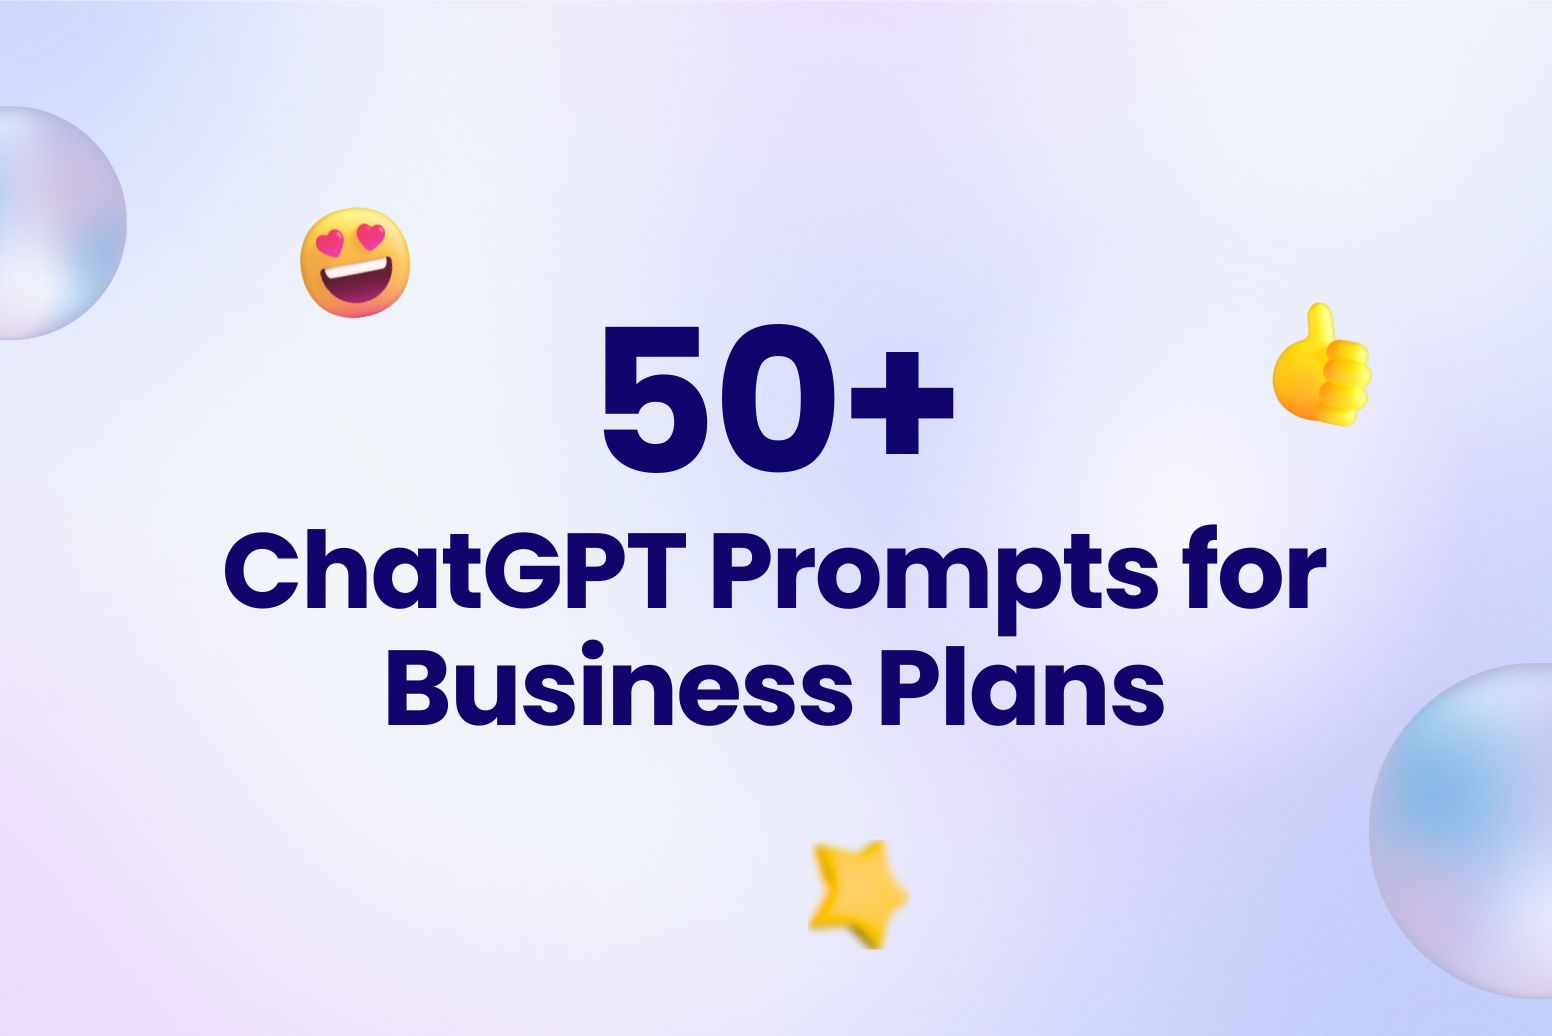 50+ ChatGPT Prompts for Business Plans